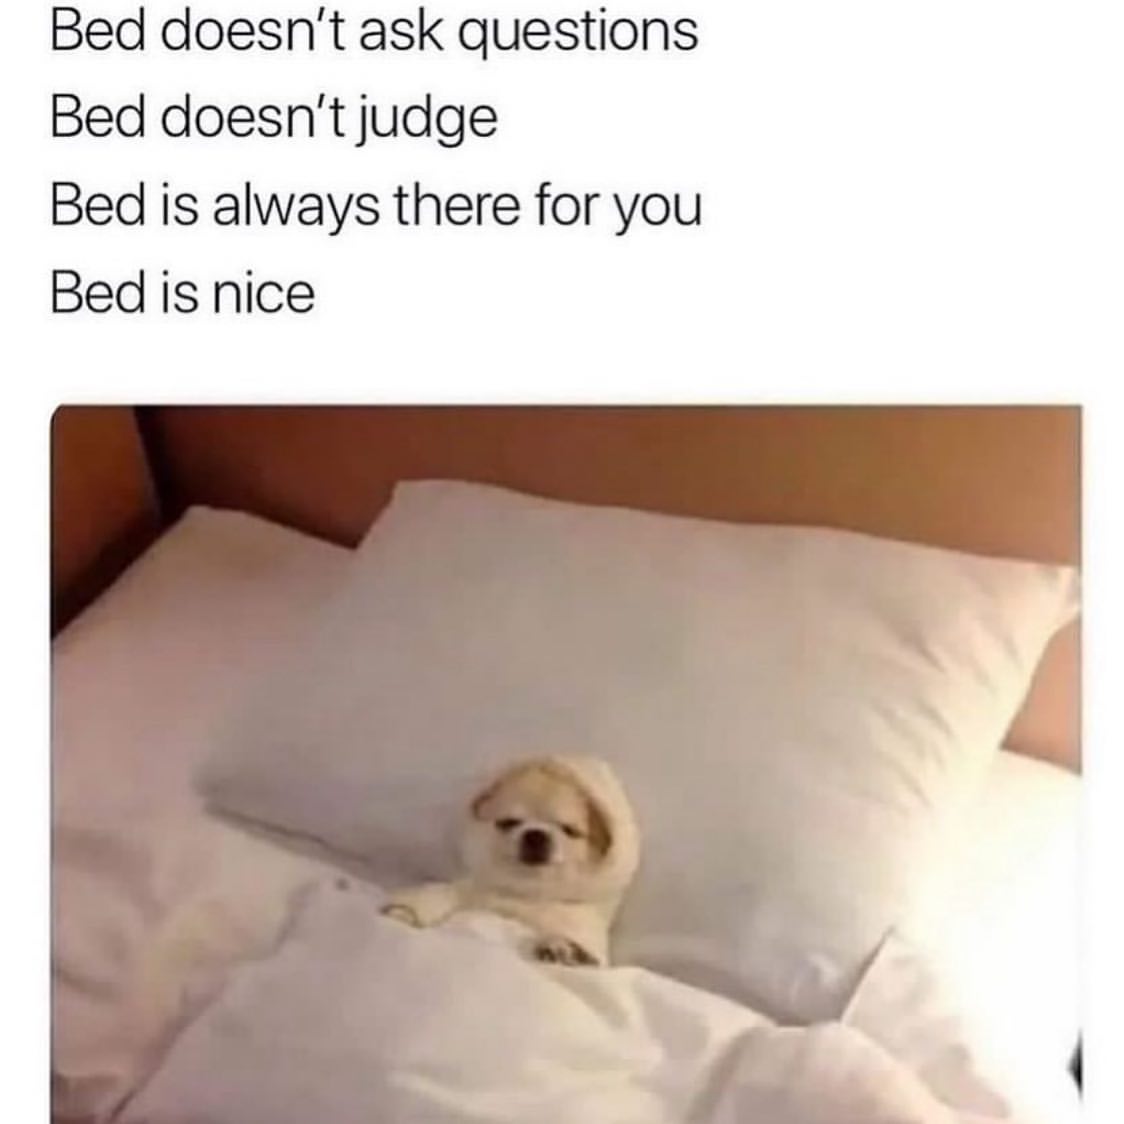 Bed doesn't ask questions. Bed doesn't judge. Bed is always there for you. Bed is nice.